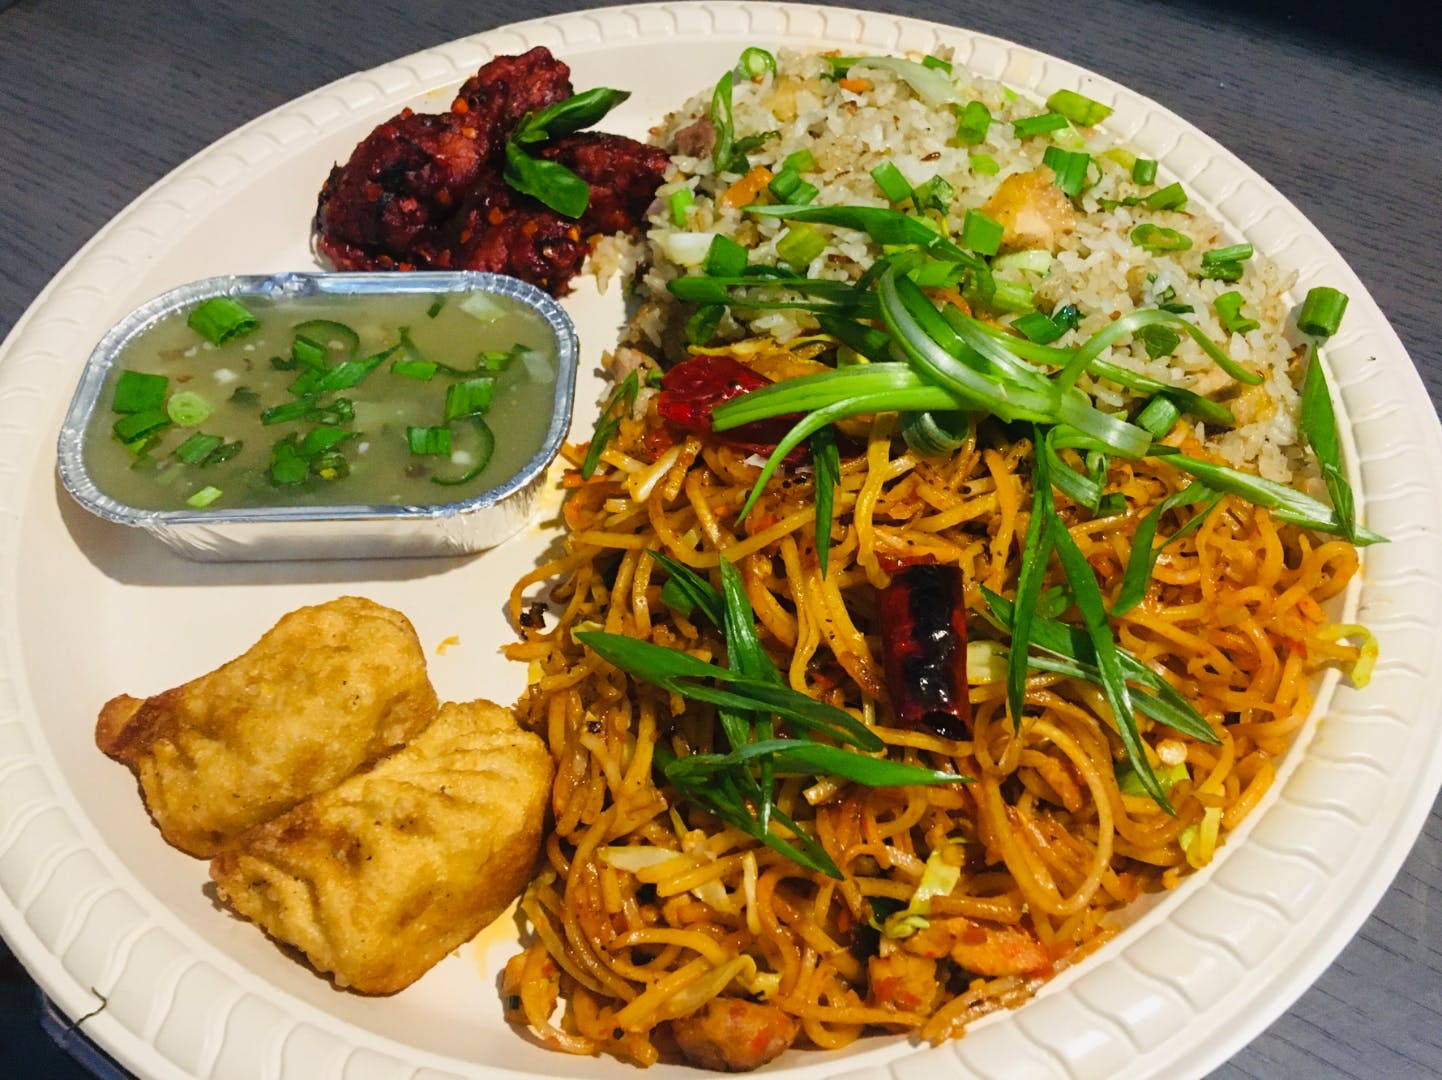 Dish,Food,Cuisine,Fried noodles,Ingredient,Mie goreng,Meat,Produce,Chinese food,Pad thai